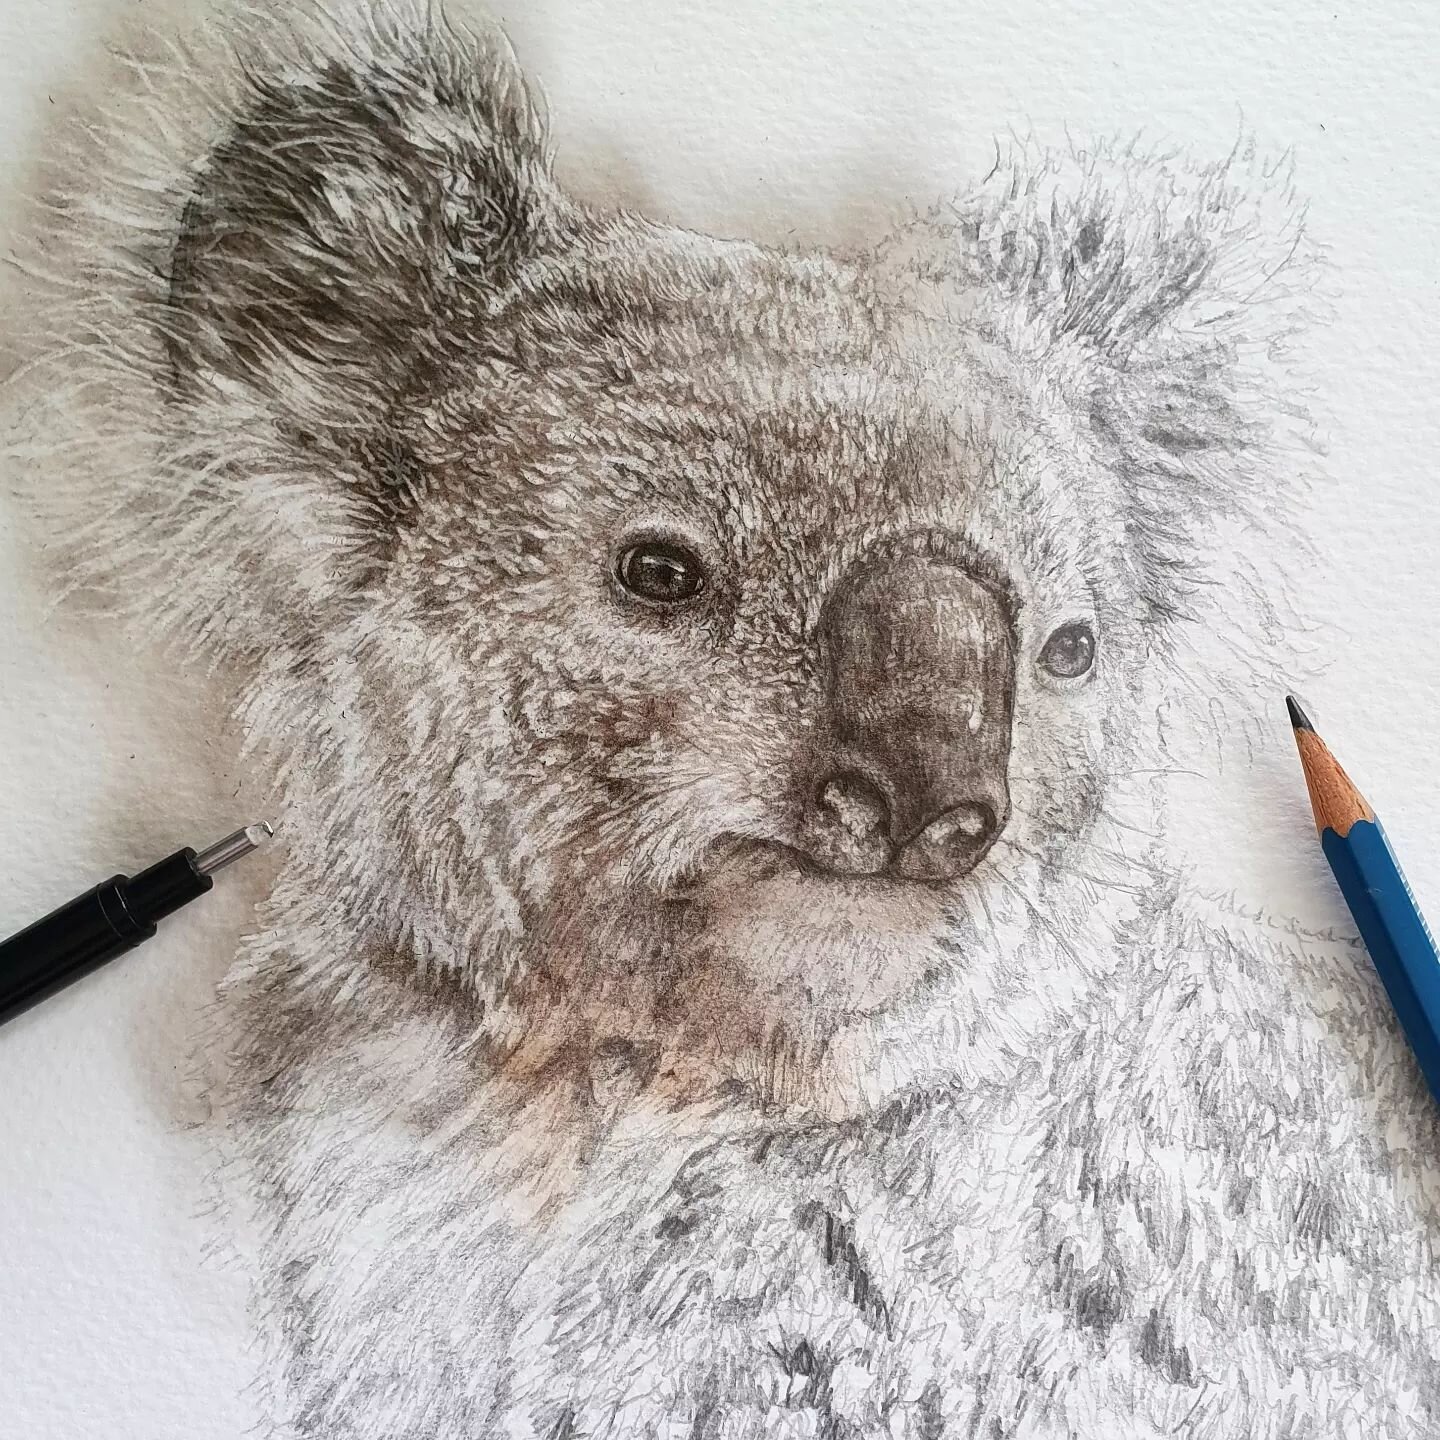 I was cleaning up old pieces in my drawer and found this little guy half done! Will finish the burn so he's a little more whole 🥰🔥

#art #paintingwithfire #fumage #wildlife #koala